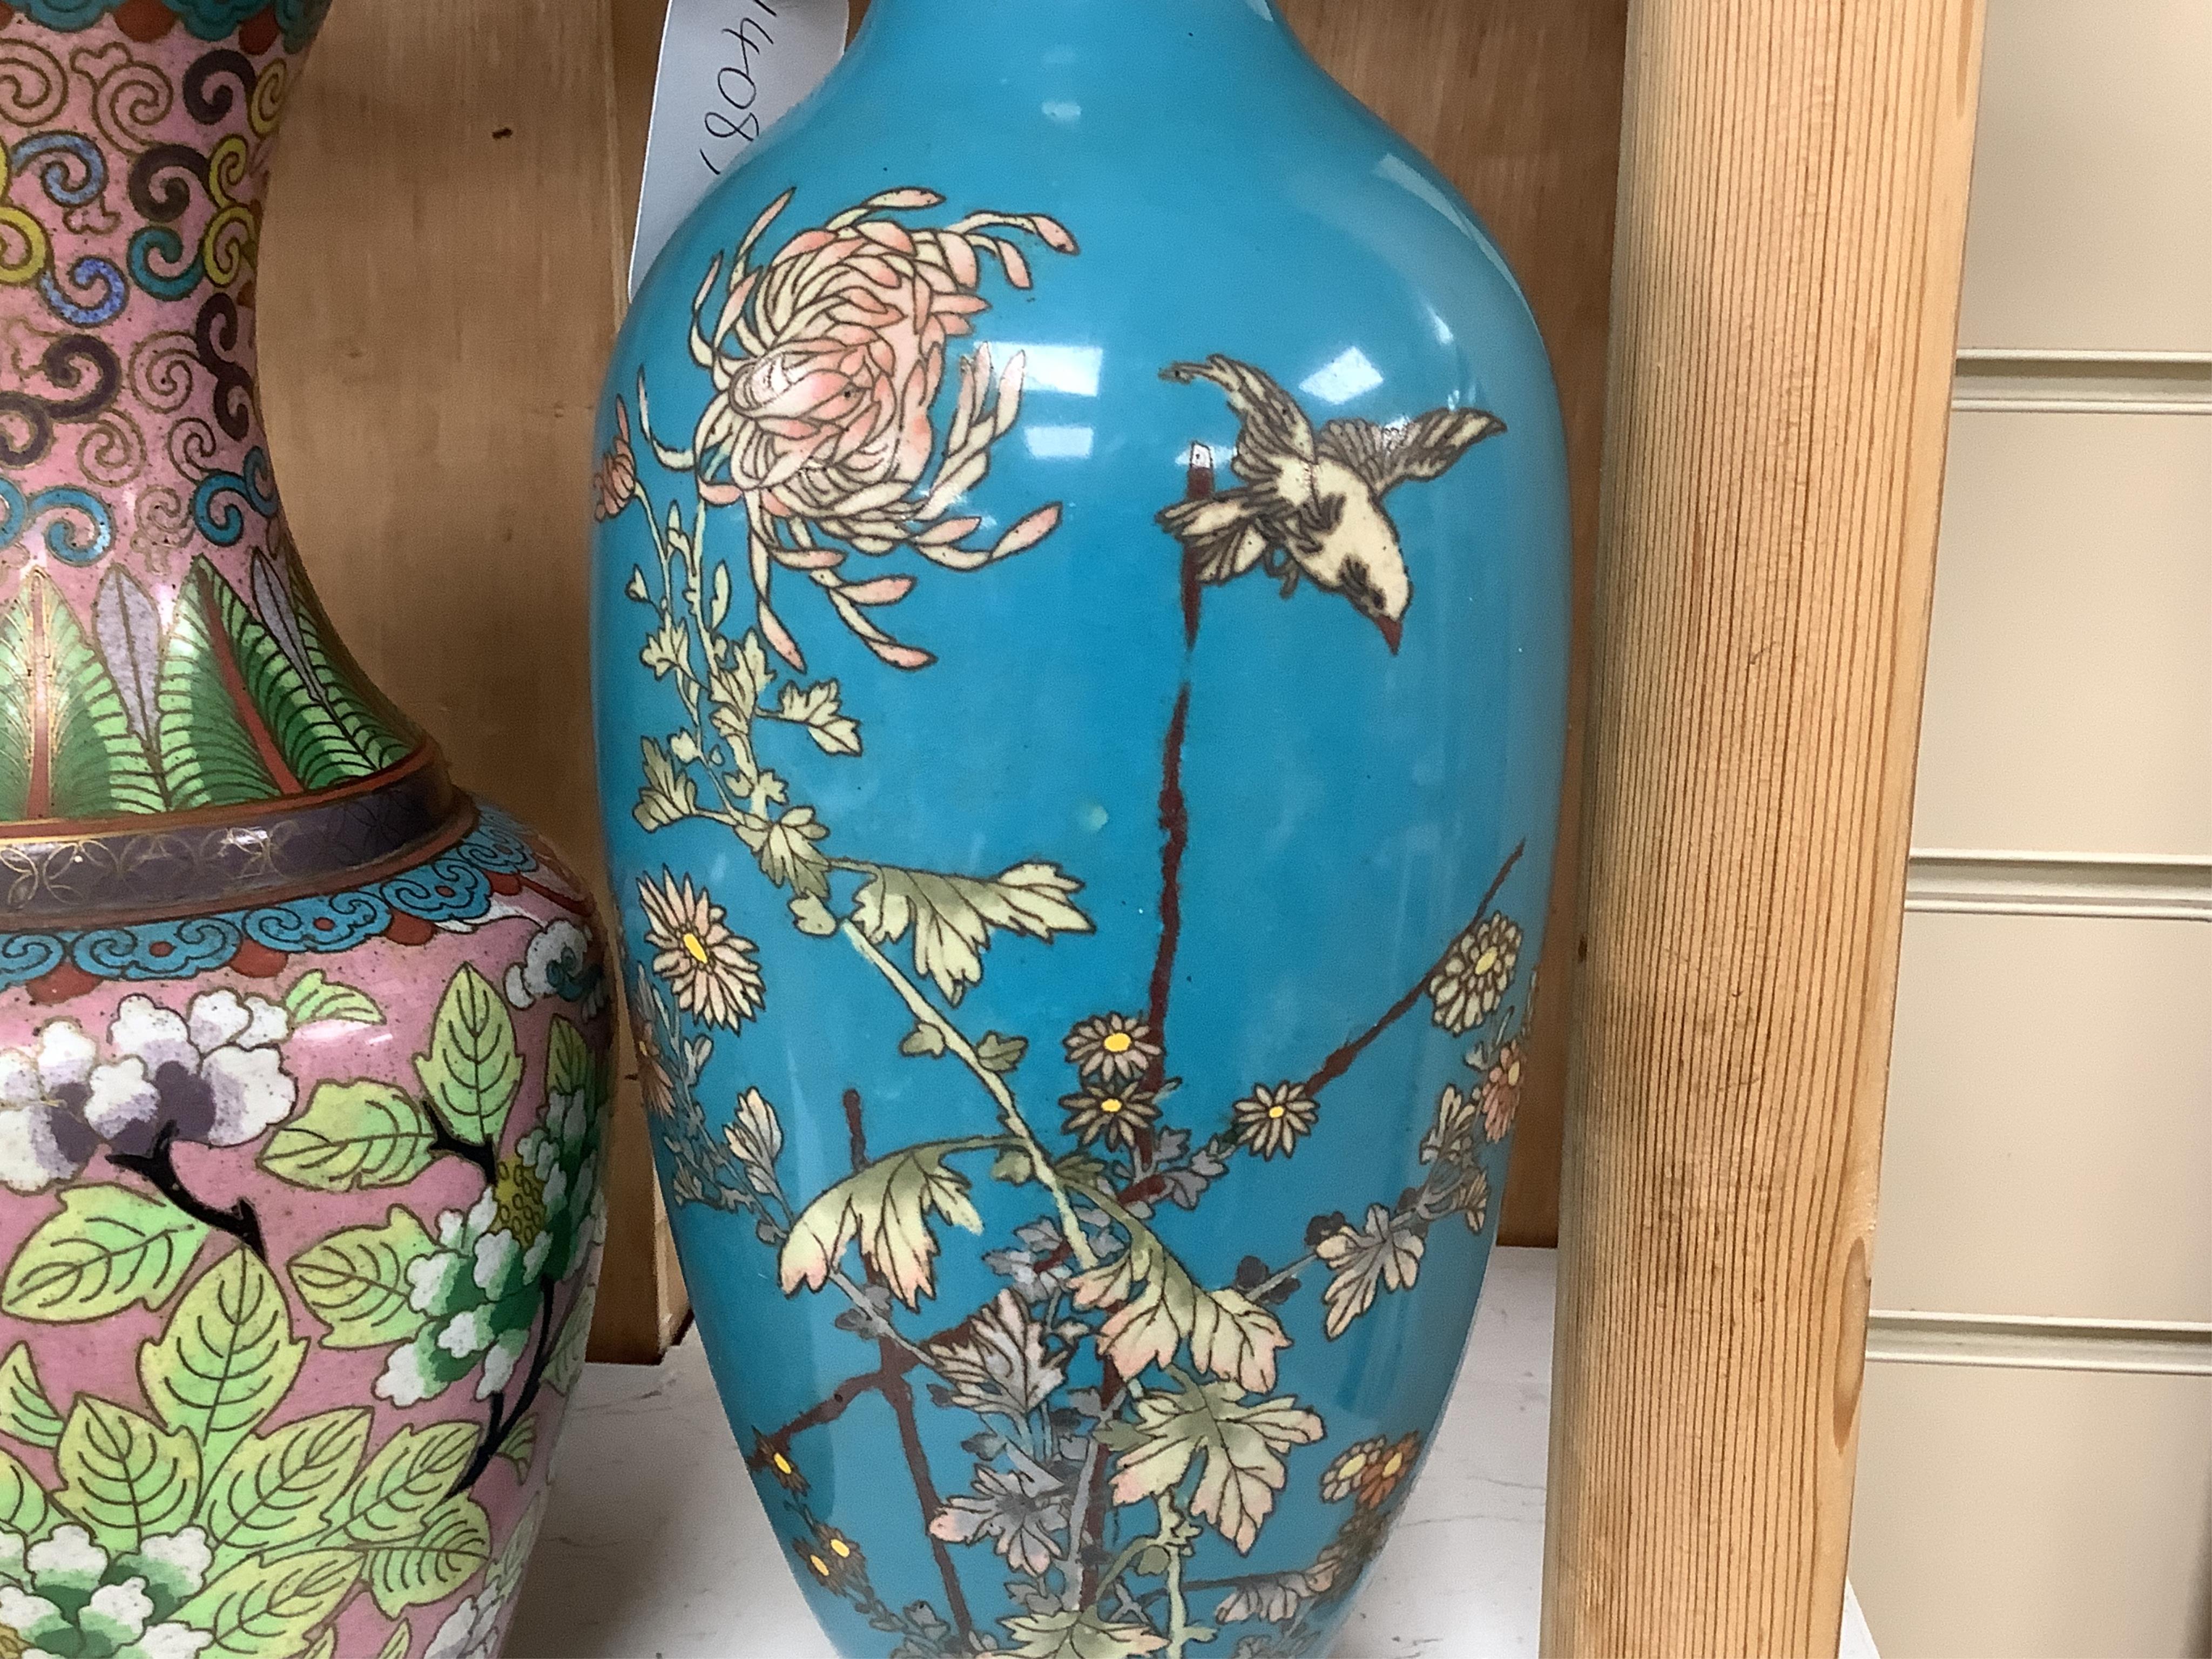 Two pairs of Chinese cloisonné enamel vases and a Japanese turquoise ground vase, 30cm high (5)